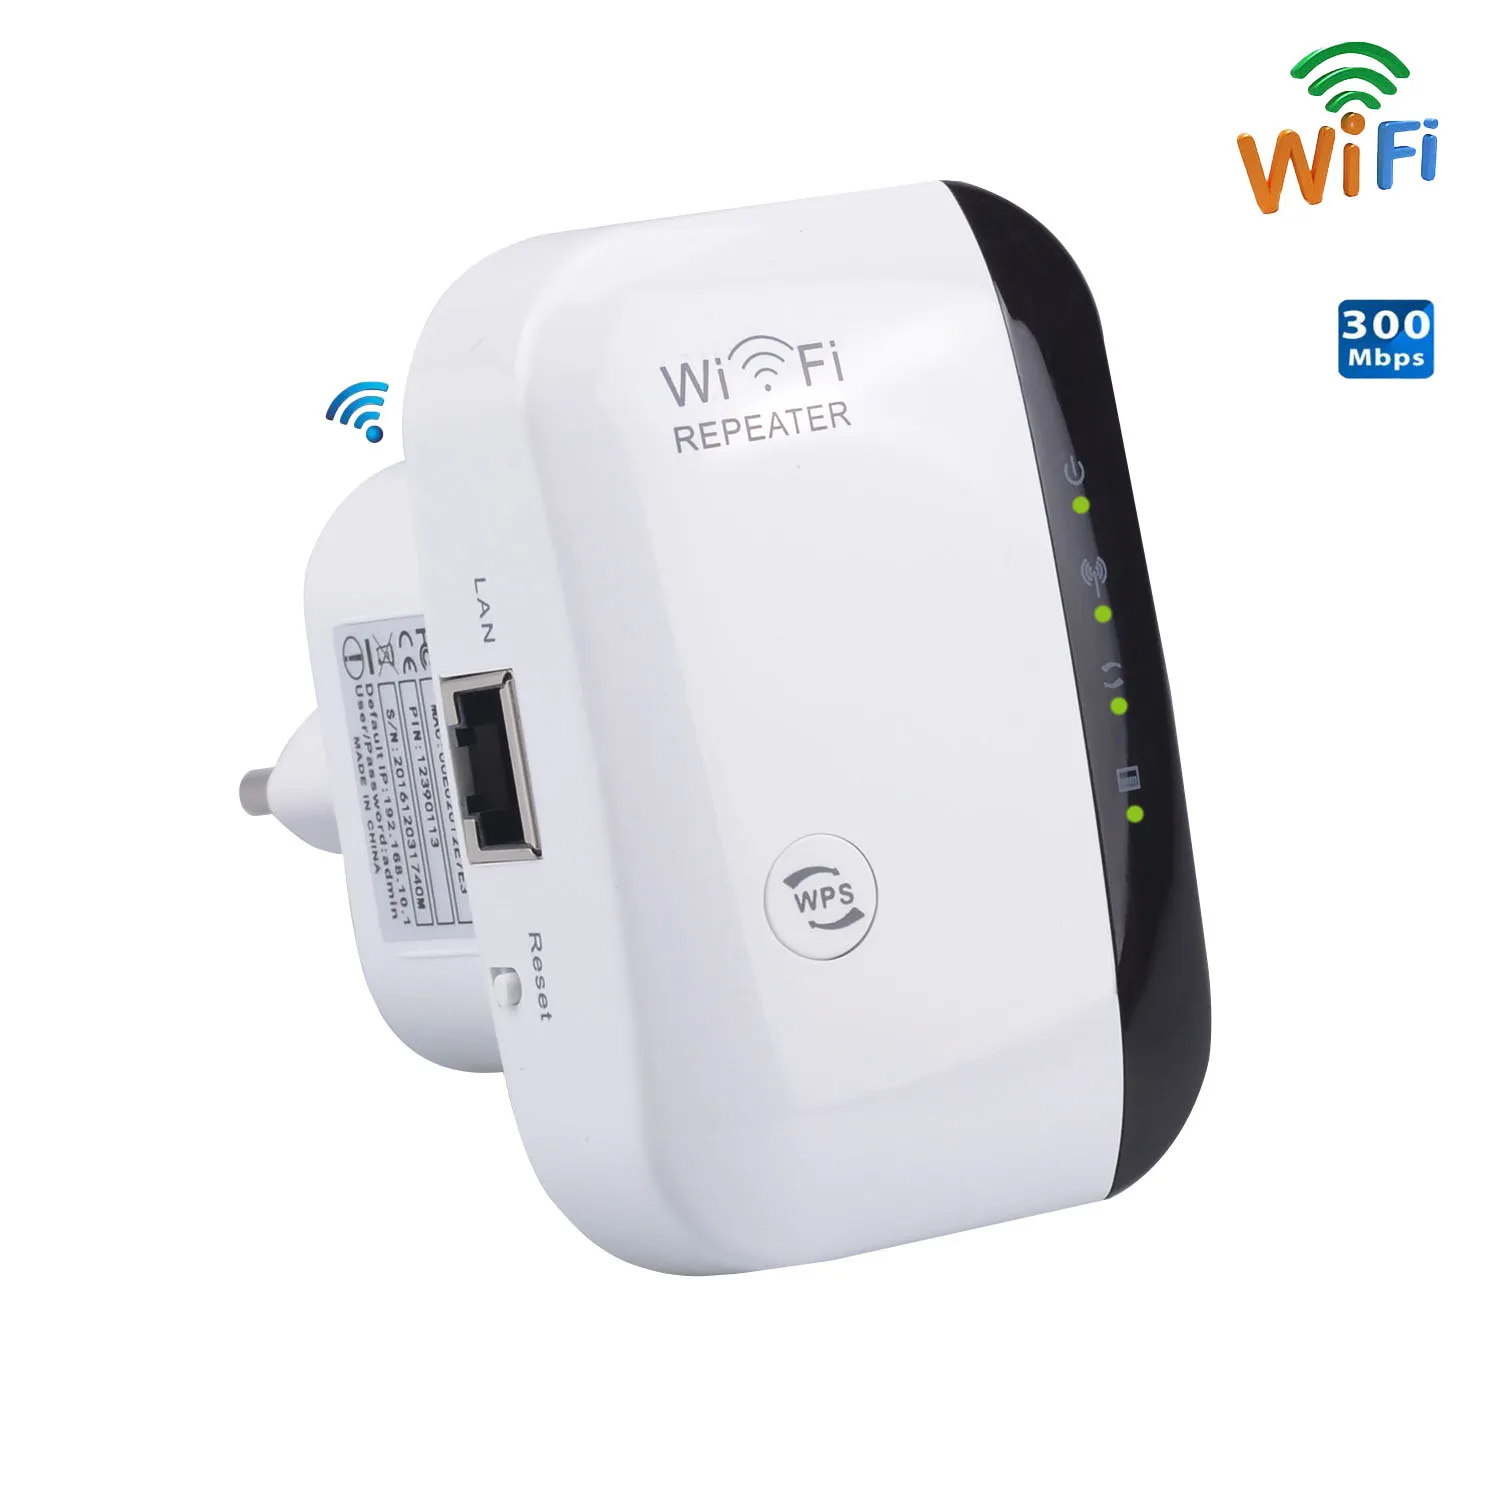 Wifi Repeater 802.11n/b/g Network Wireless Router 300Mbps Range Expander Signal Amplifier Repetidor